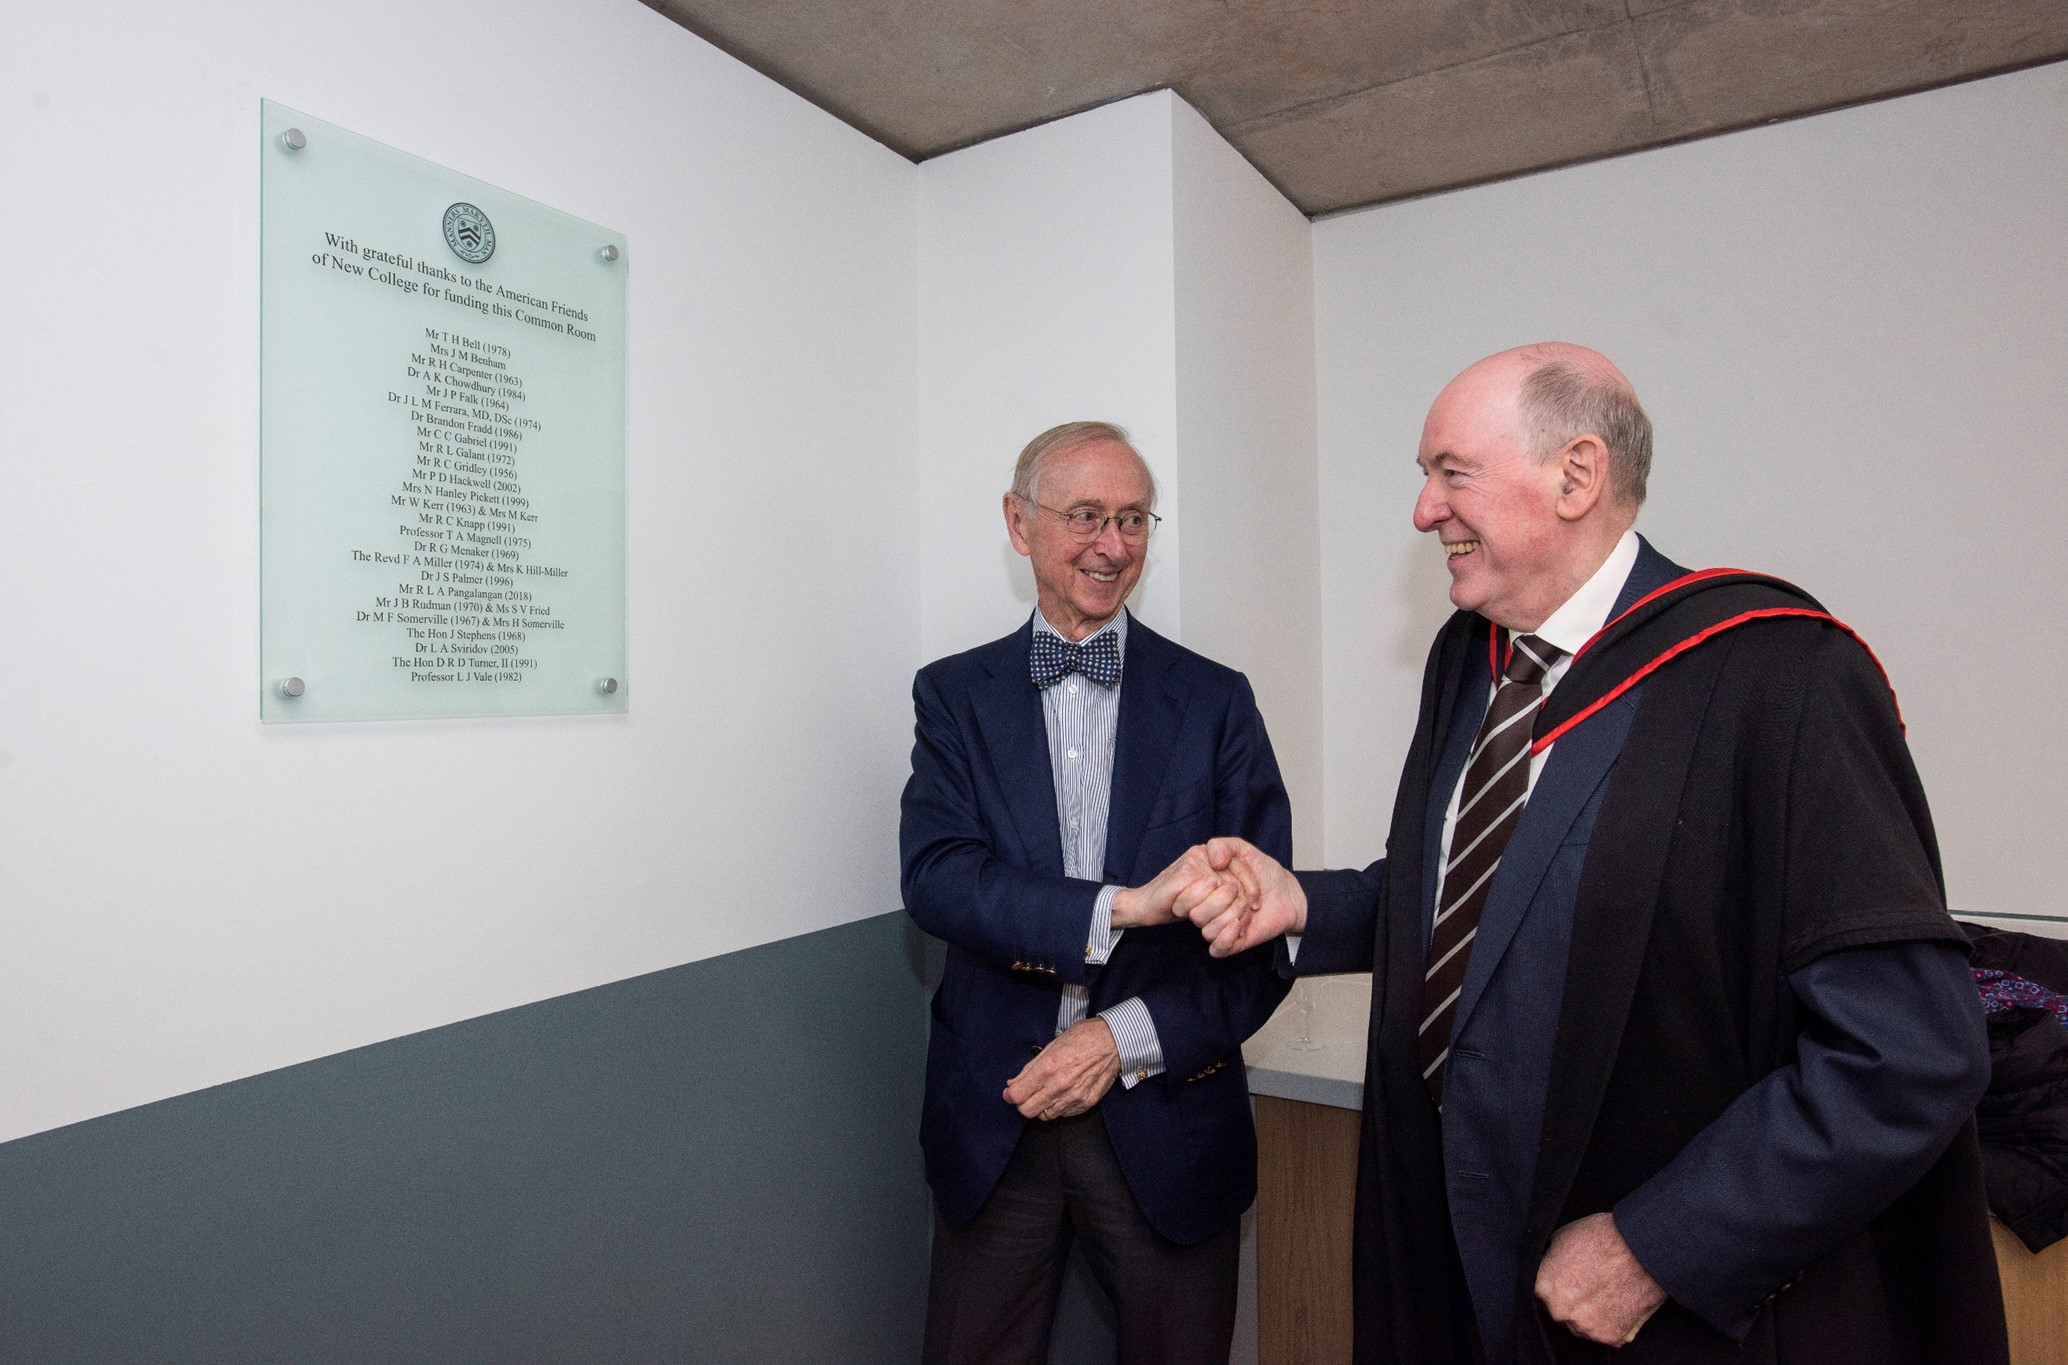 Bill Kerr examines the American Friends plaque in the student study space